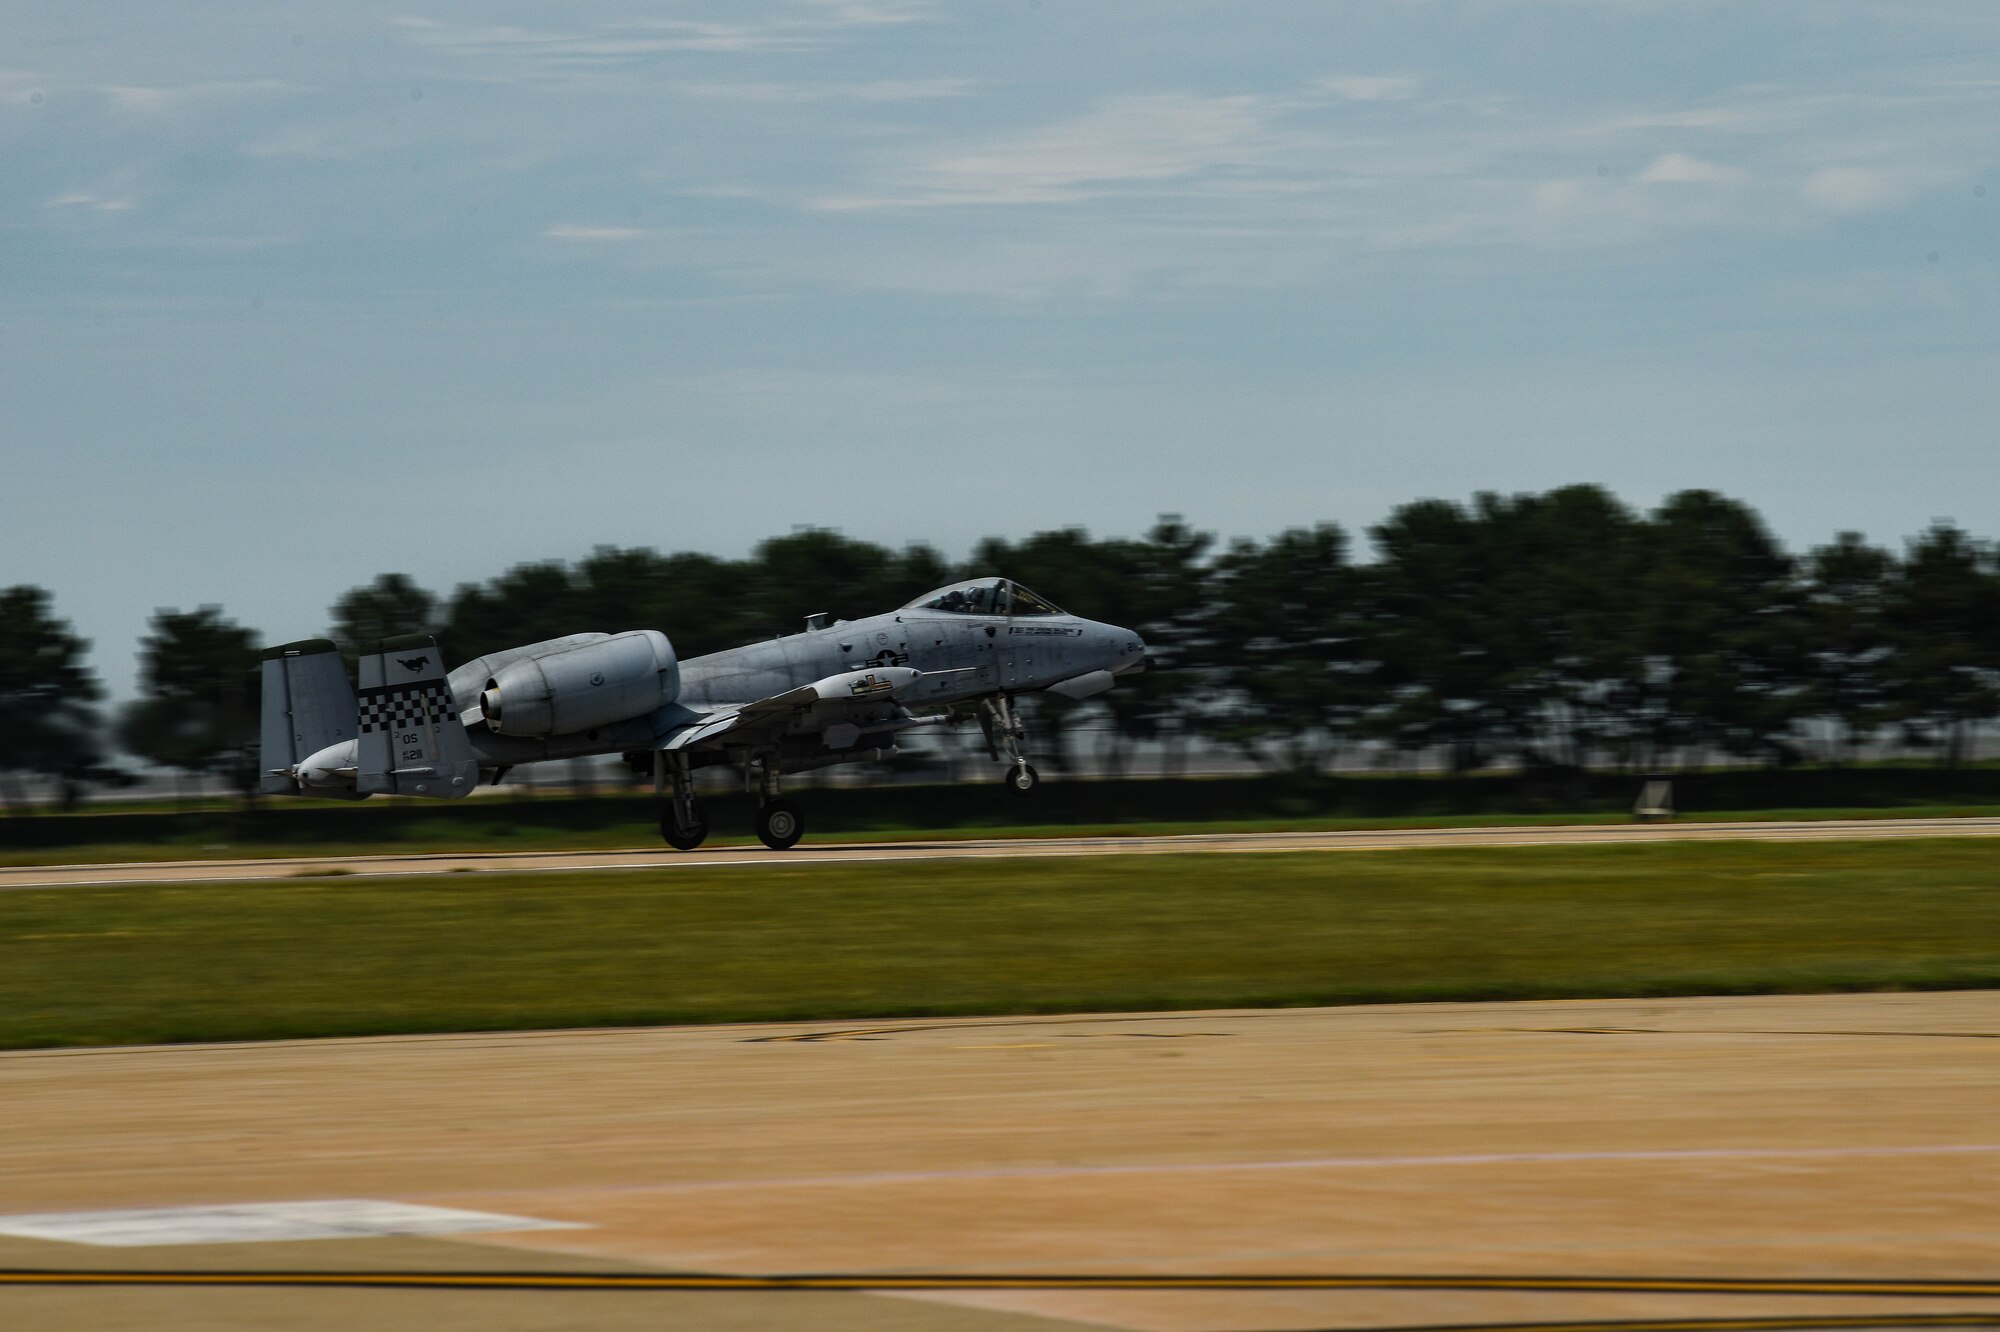 An A-10 Thunderbolt II assigned to the 25th Fighter Squadron (FS) takes off during a training event at Kunsan Air Base, Republic of Korea (ROK), Sept. 15, 2022. The 25th FS is assigned to the 51st Fighter Wing, Osan AB, ROK. (U.S. Air Force photo by Tech. Sgt. Timothy Dischinat)